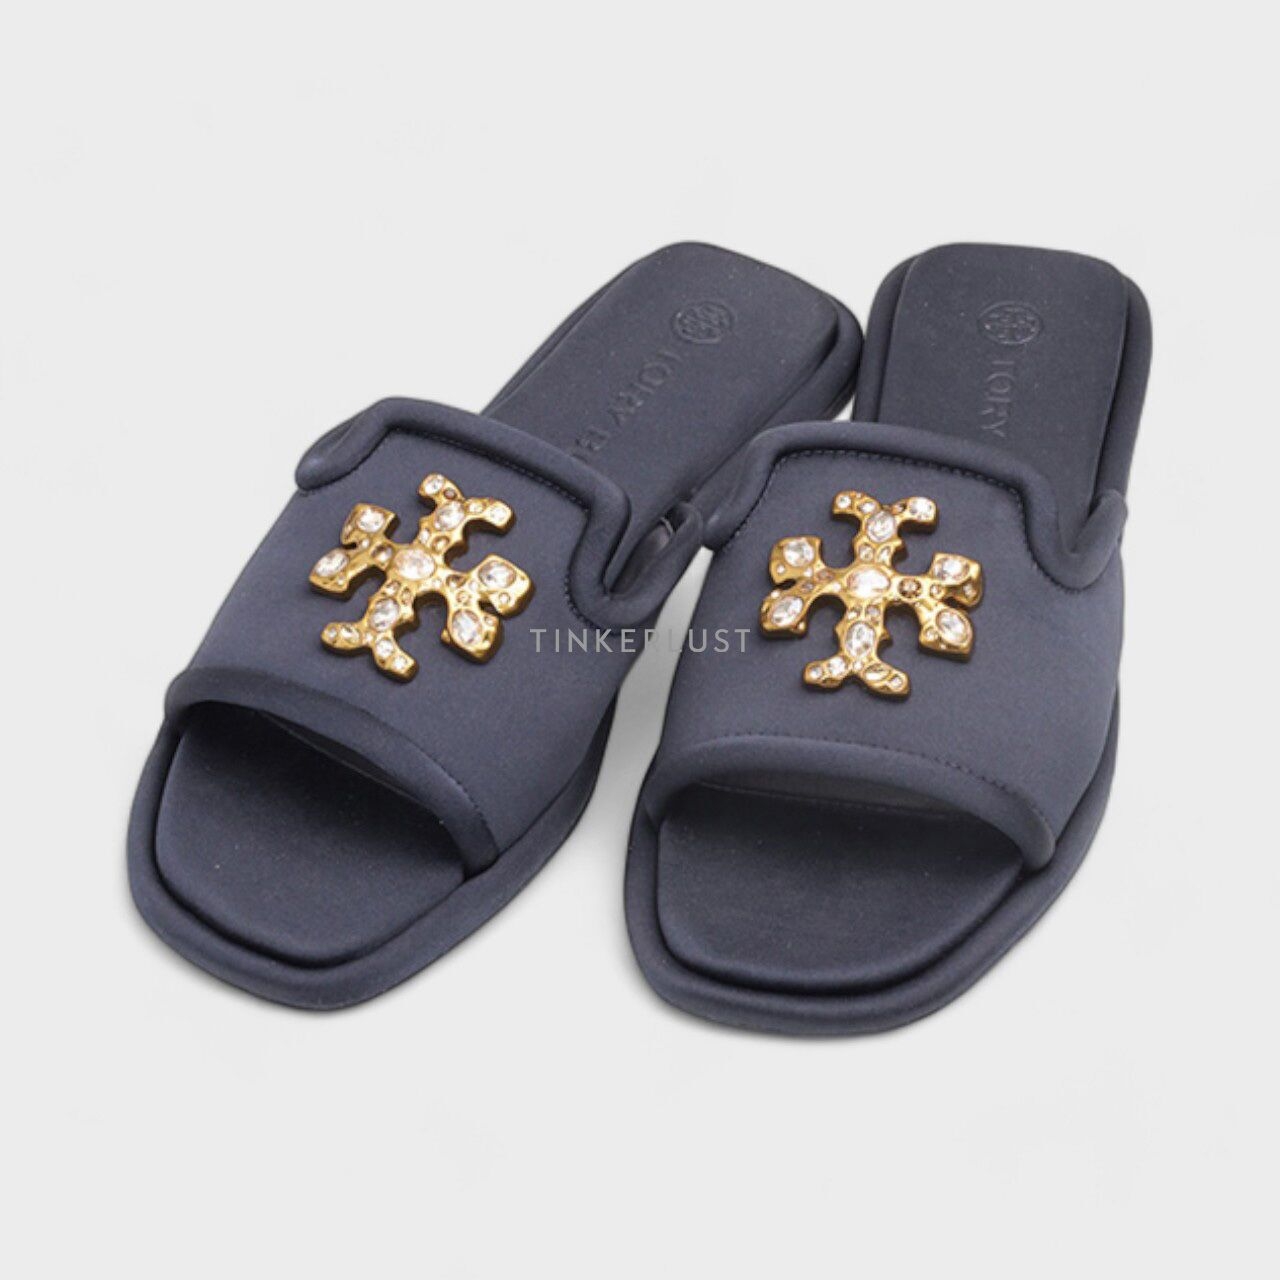 Tory Burch Jeweled in Perfect Navy Satin Slides Sandals